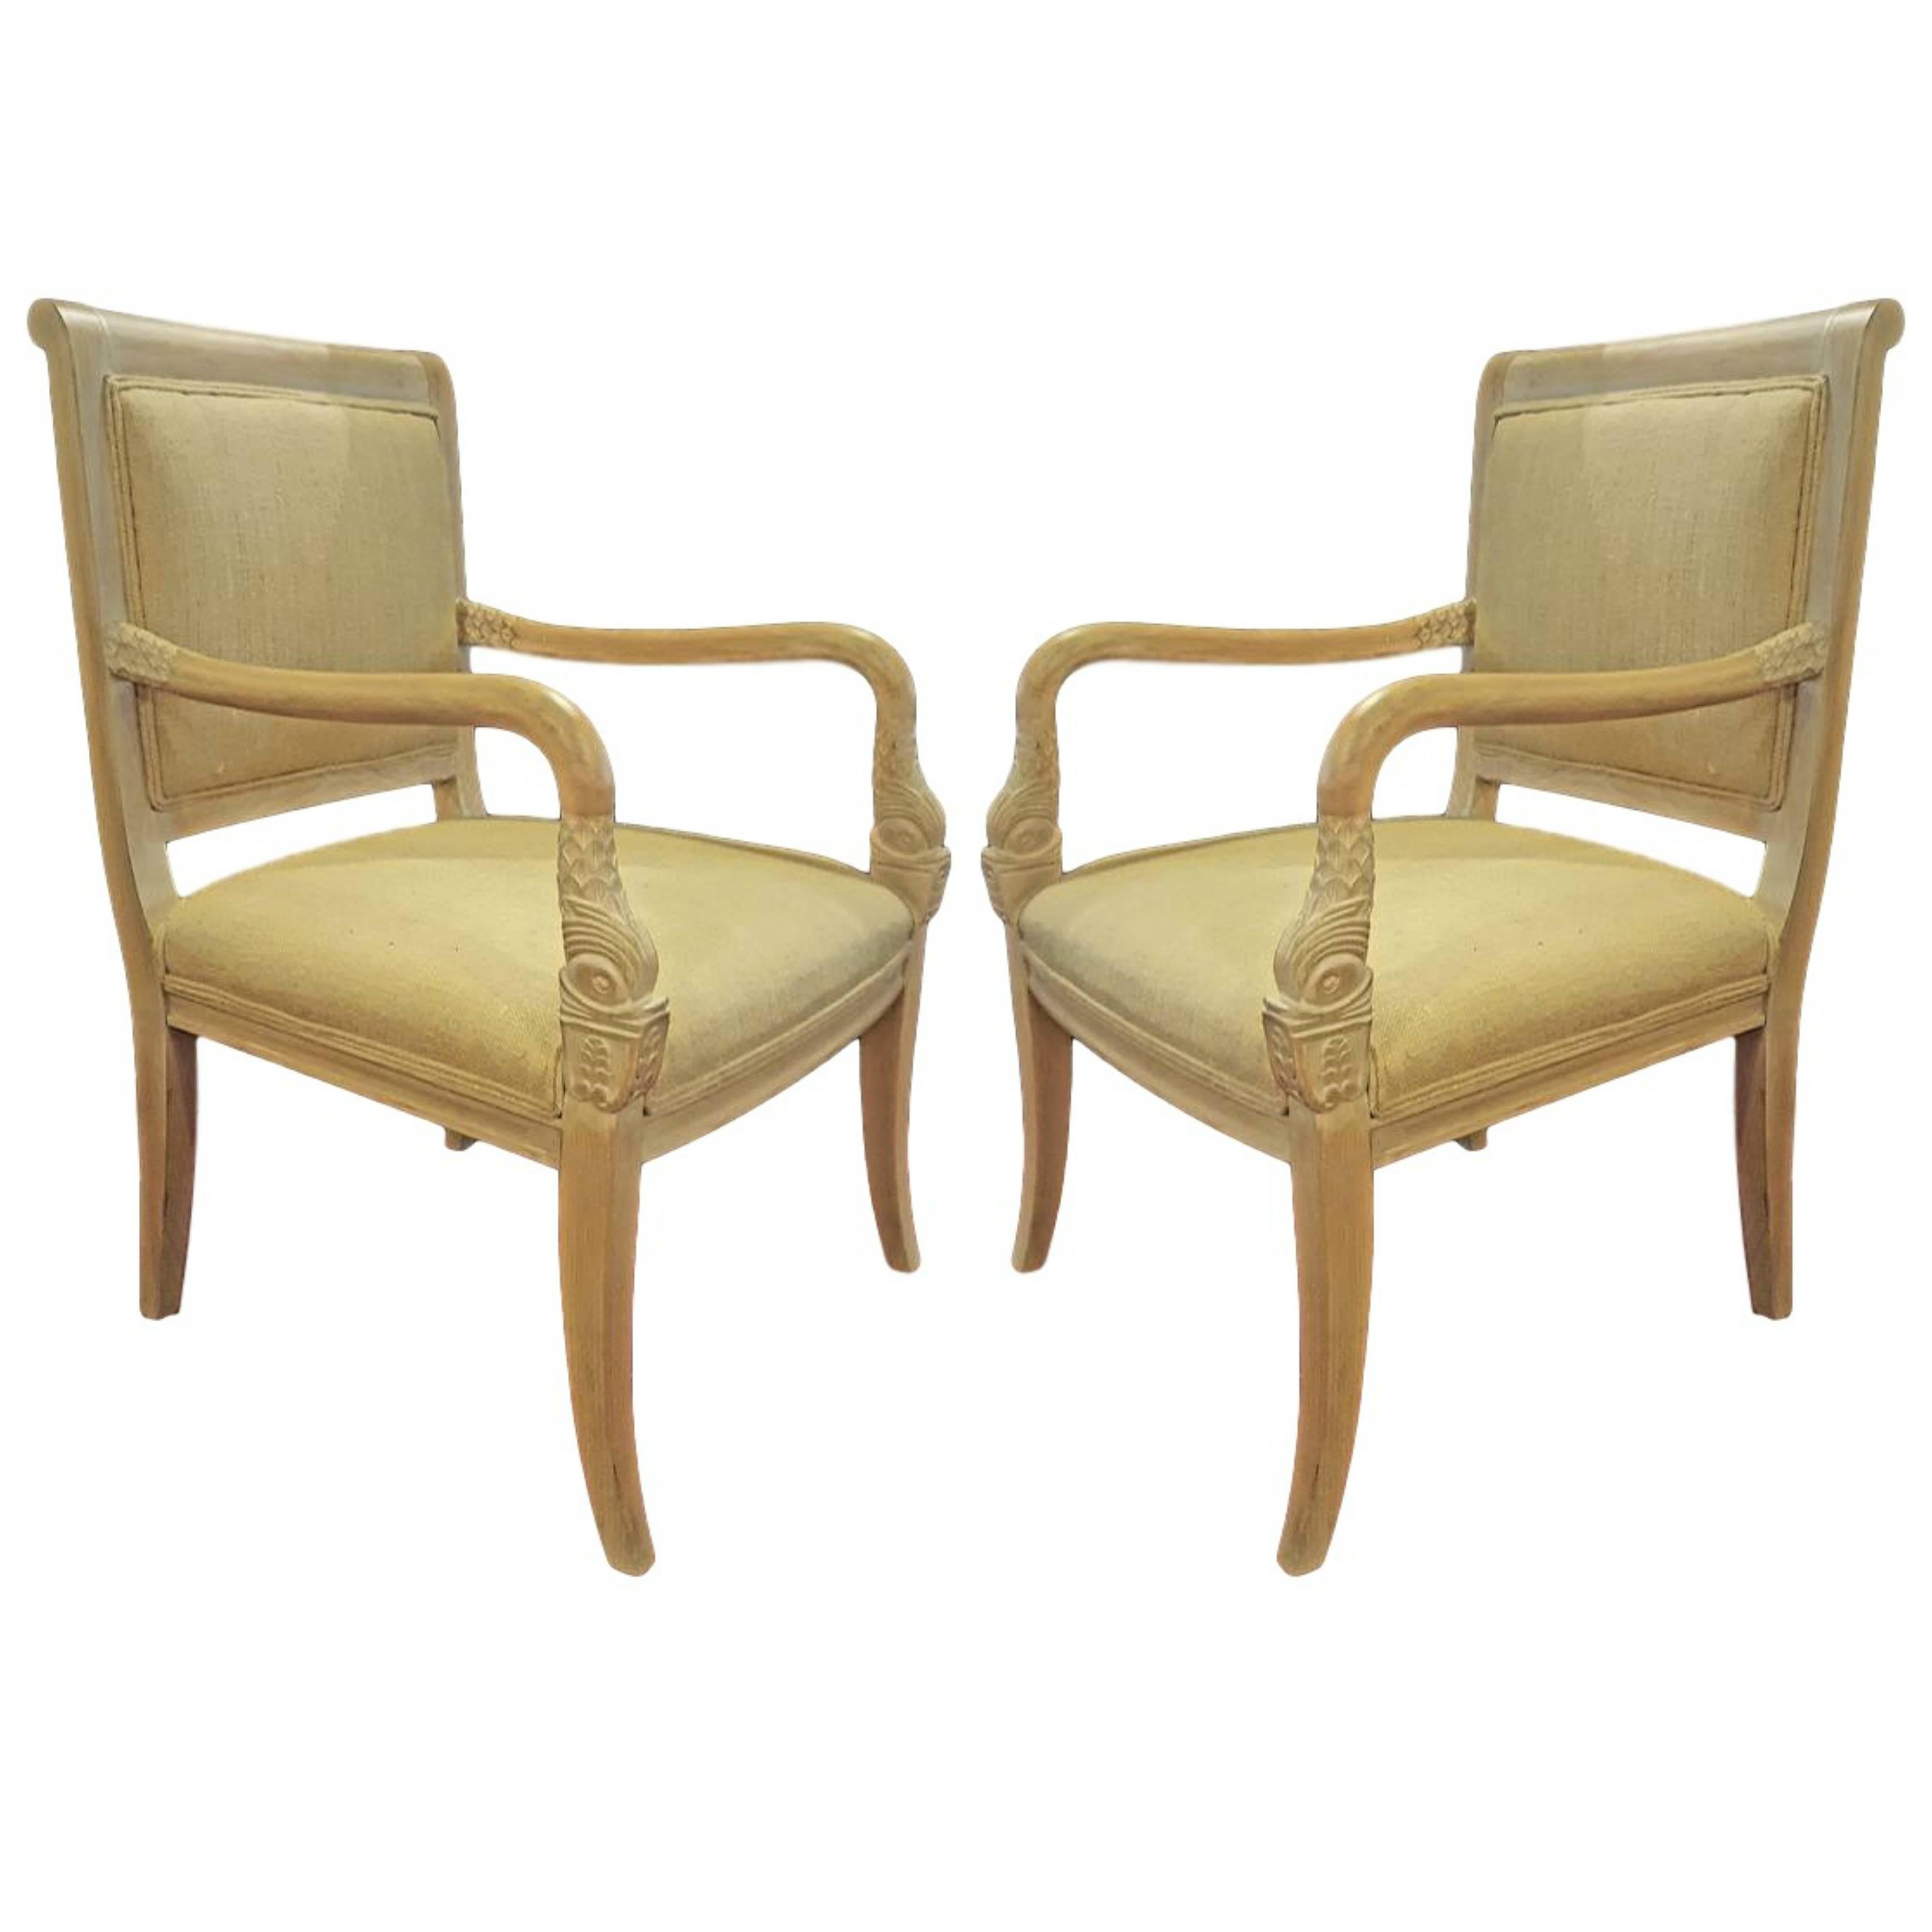 Pair of Armchairs with Carved Dolphin Head Hand Rests. 